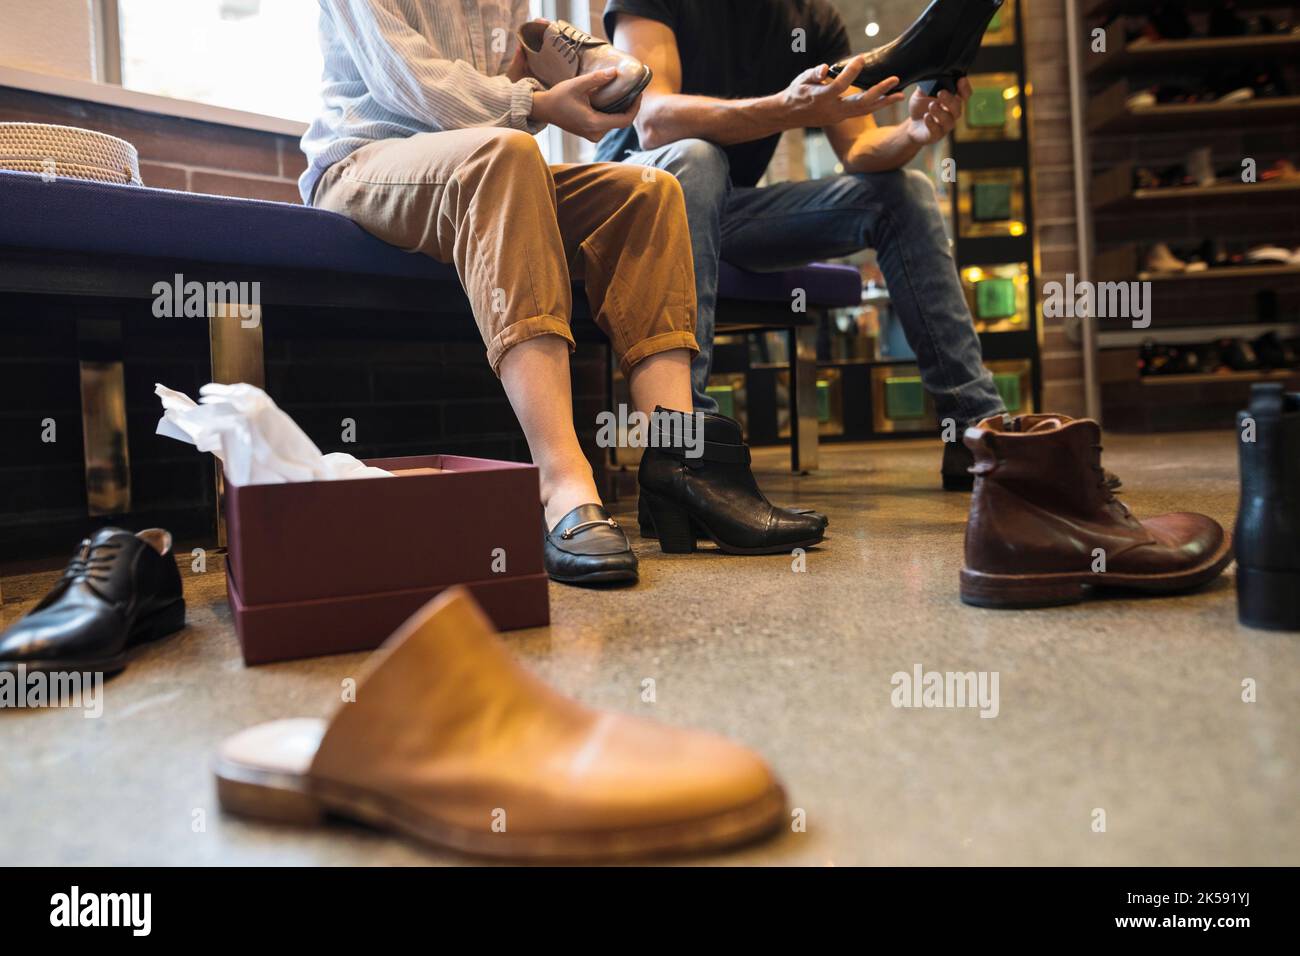 Woman sitting down and trying on shoes in shoe store Stock Photo